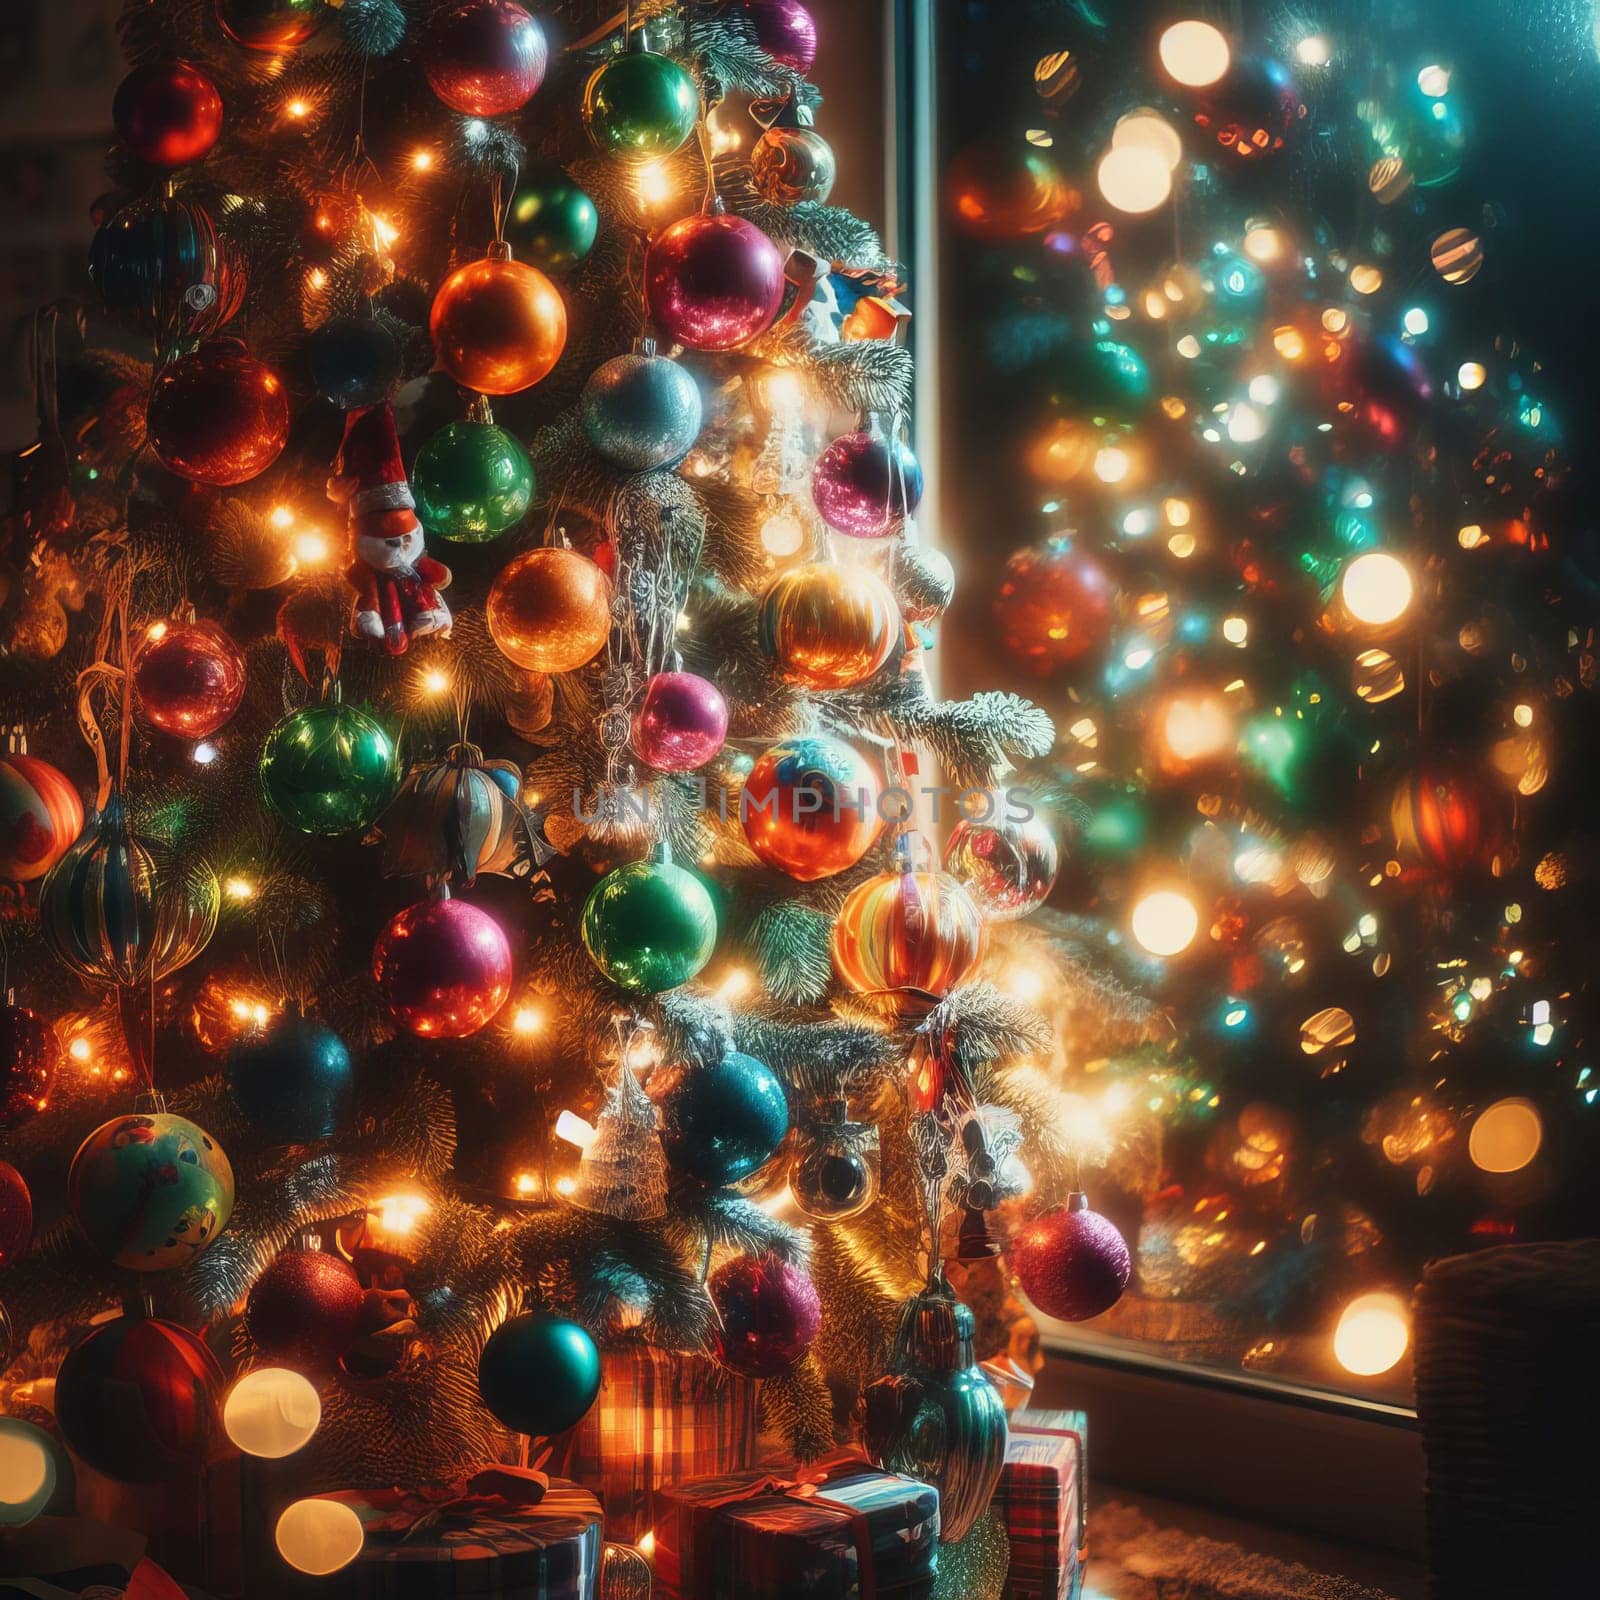 Interior Christmas. magic glowing tree, gifts in dark at night. High quality photo.